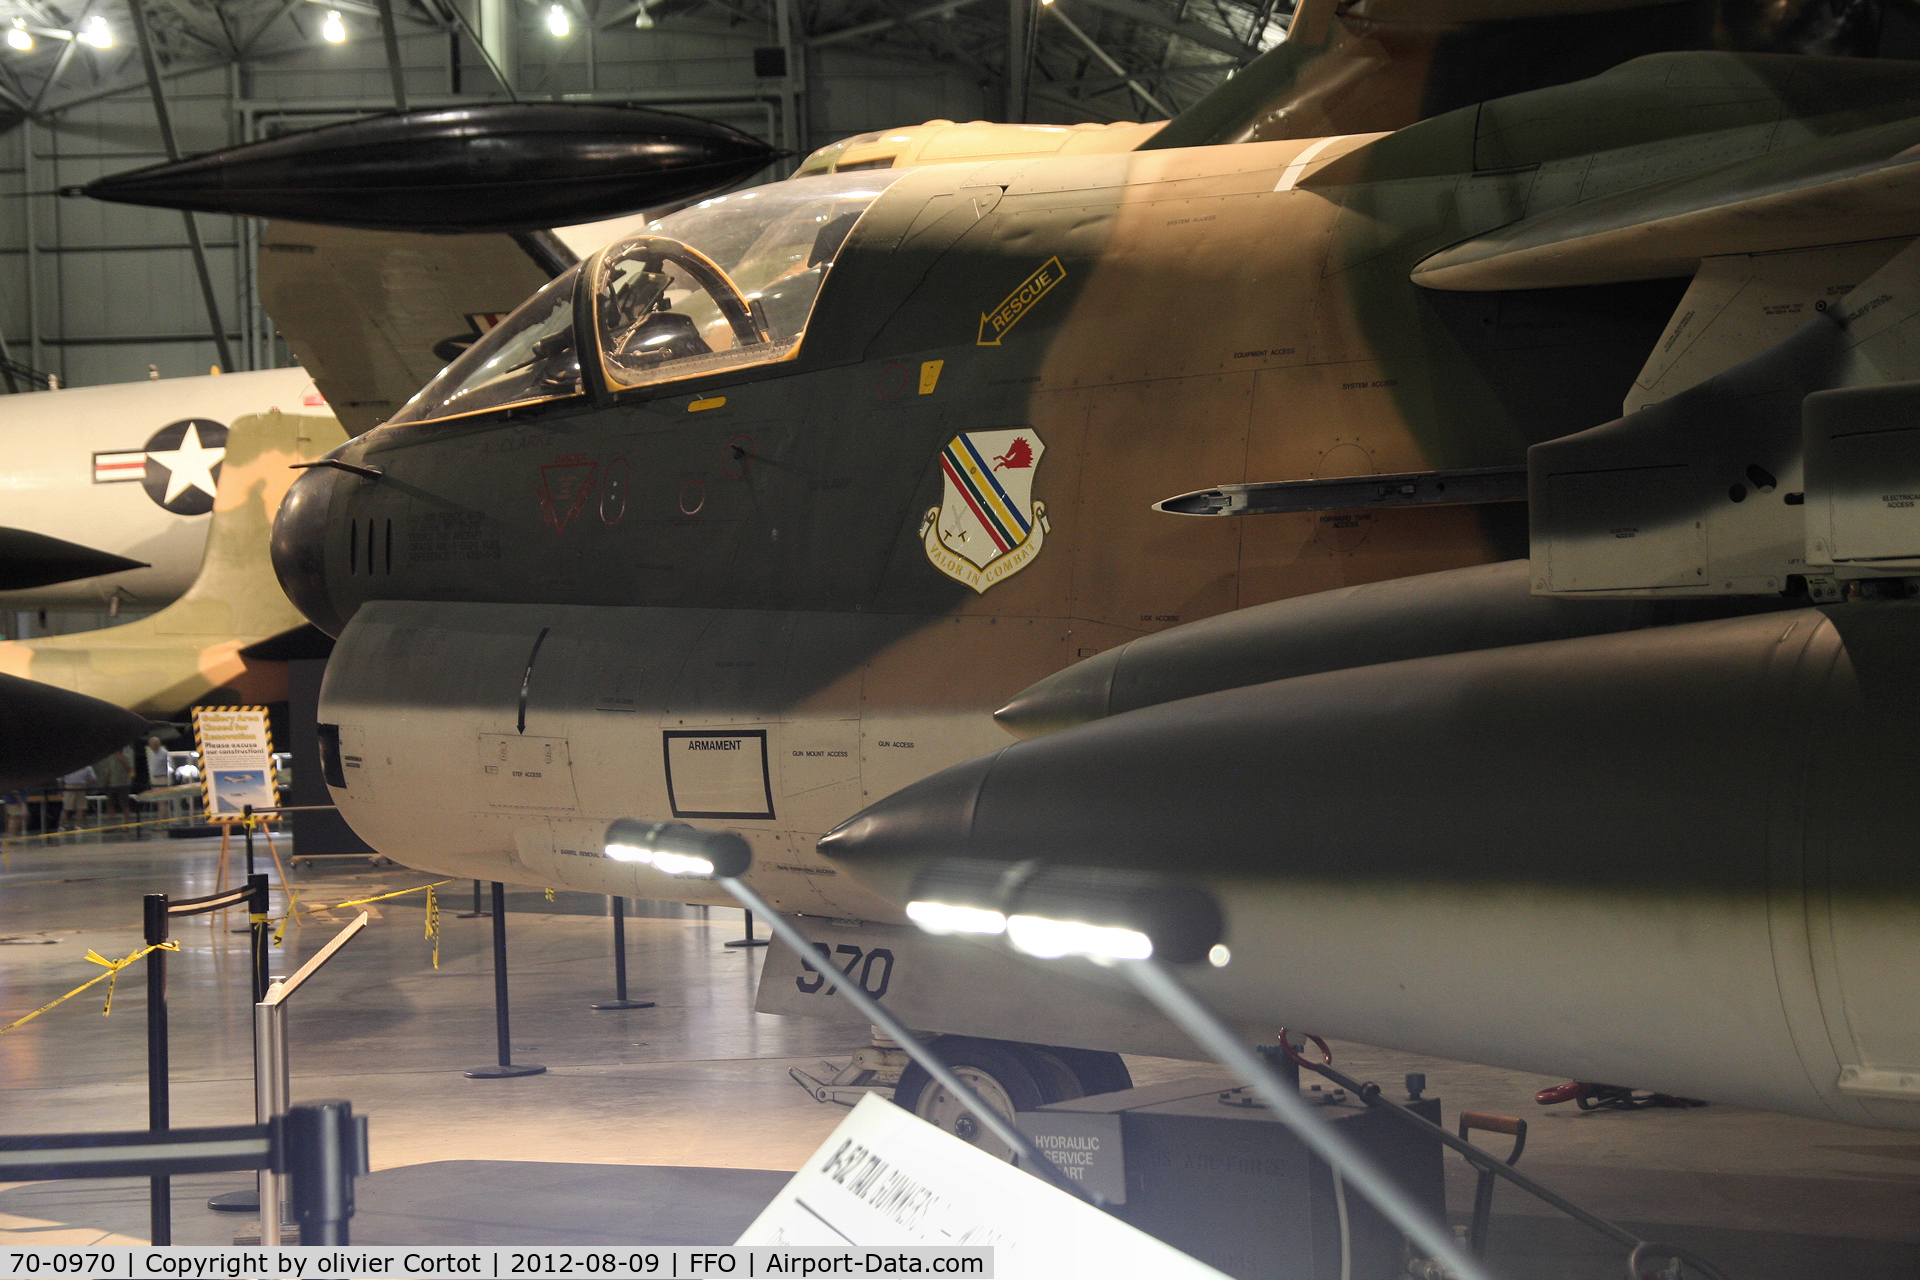 70-0970, 1970 LTV A-7D Corsair II C/N D-116, The A-7 is not very common in US museums...